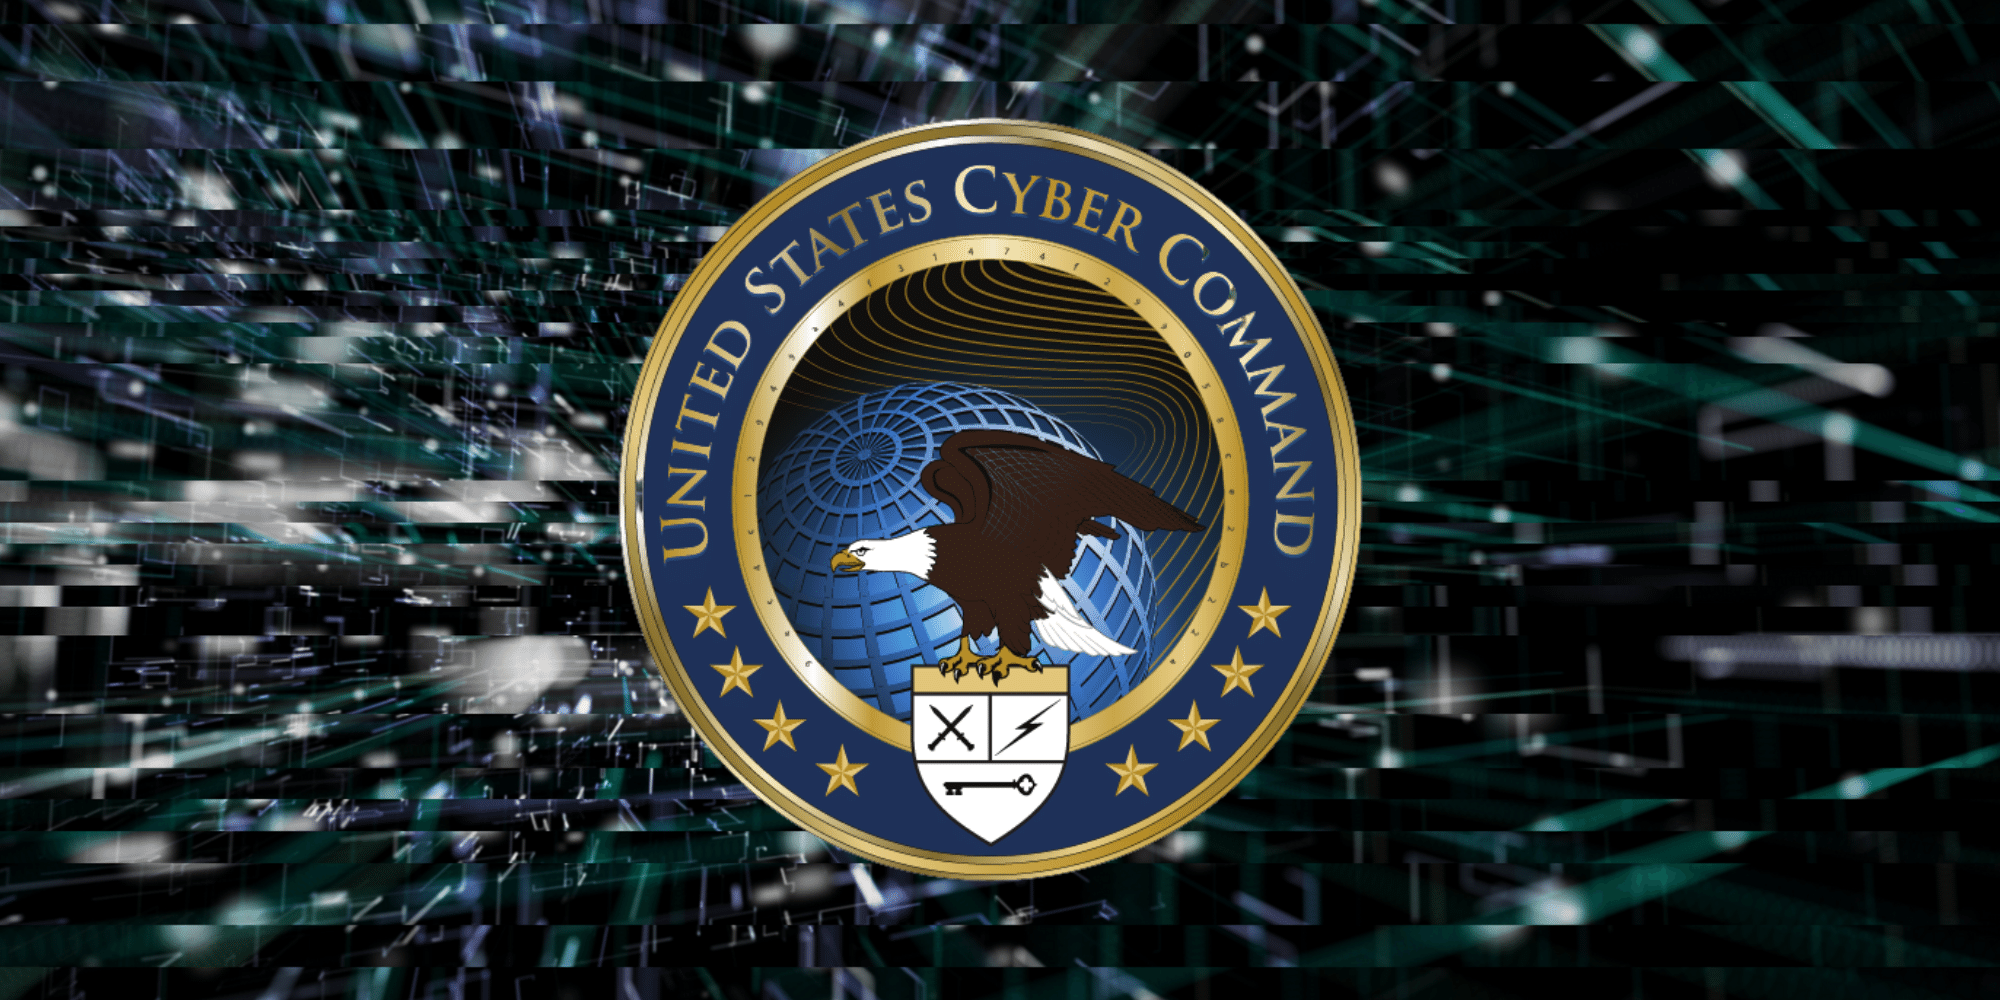 Expand U.S. CYBERCOM to better secure American Infrastructure